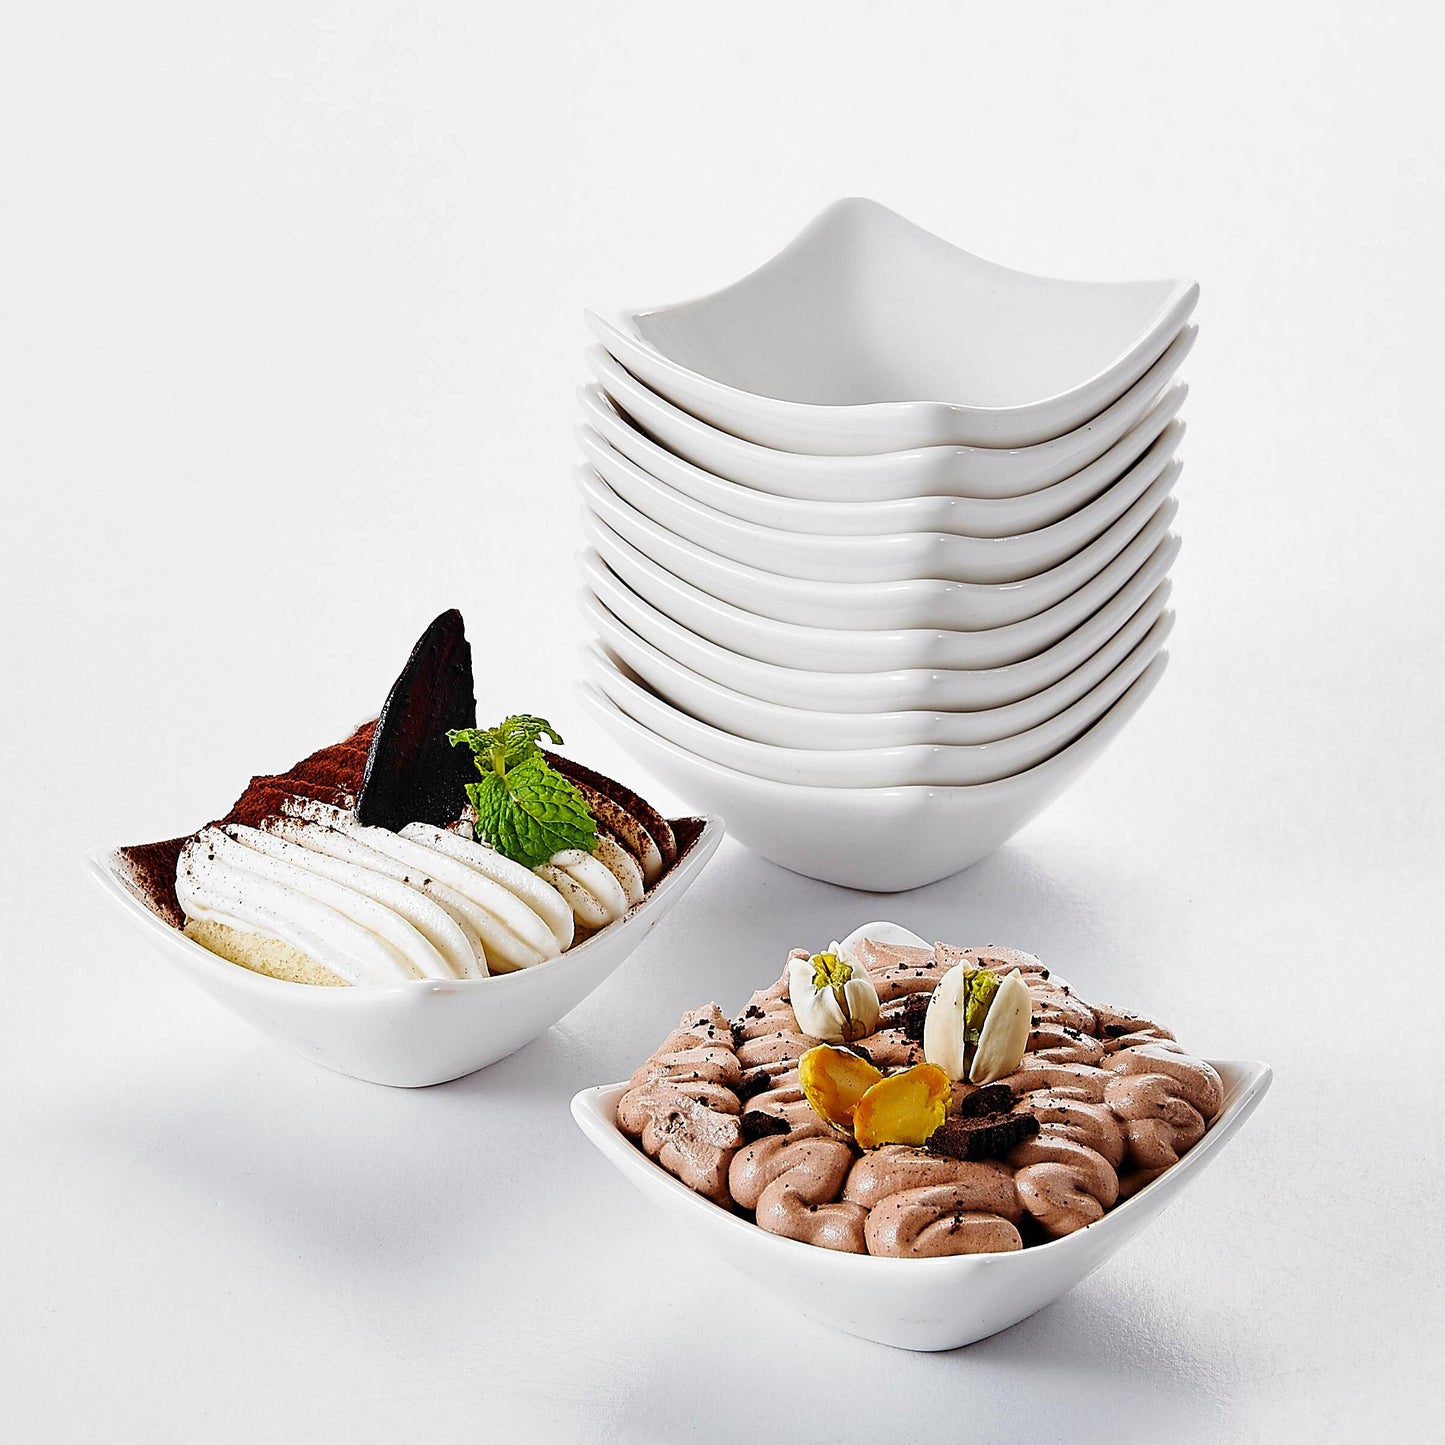 12-Piece White China Porcelain Ceramic Bowl (60 ml/ 3") - Nordic Side - 12, Bowl, Ceramic, Condiment, Cream, Dessert, Dipping, Dish, Dishes, for, Fruit, MALACASA, Ngredients, Piece, Porcelain